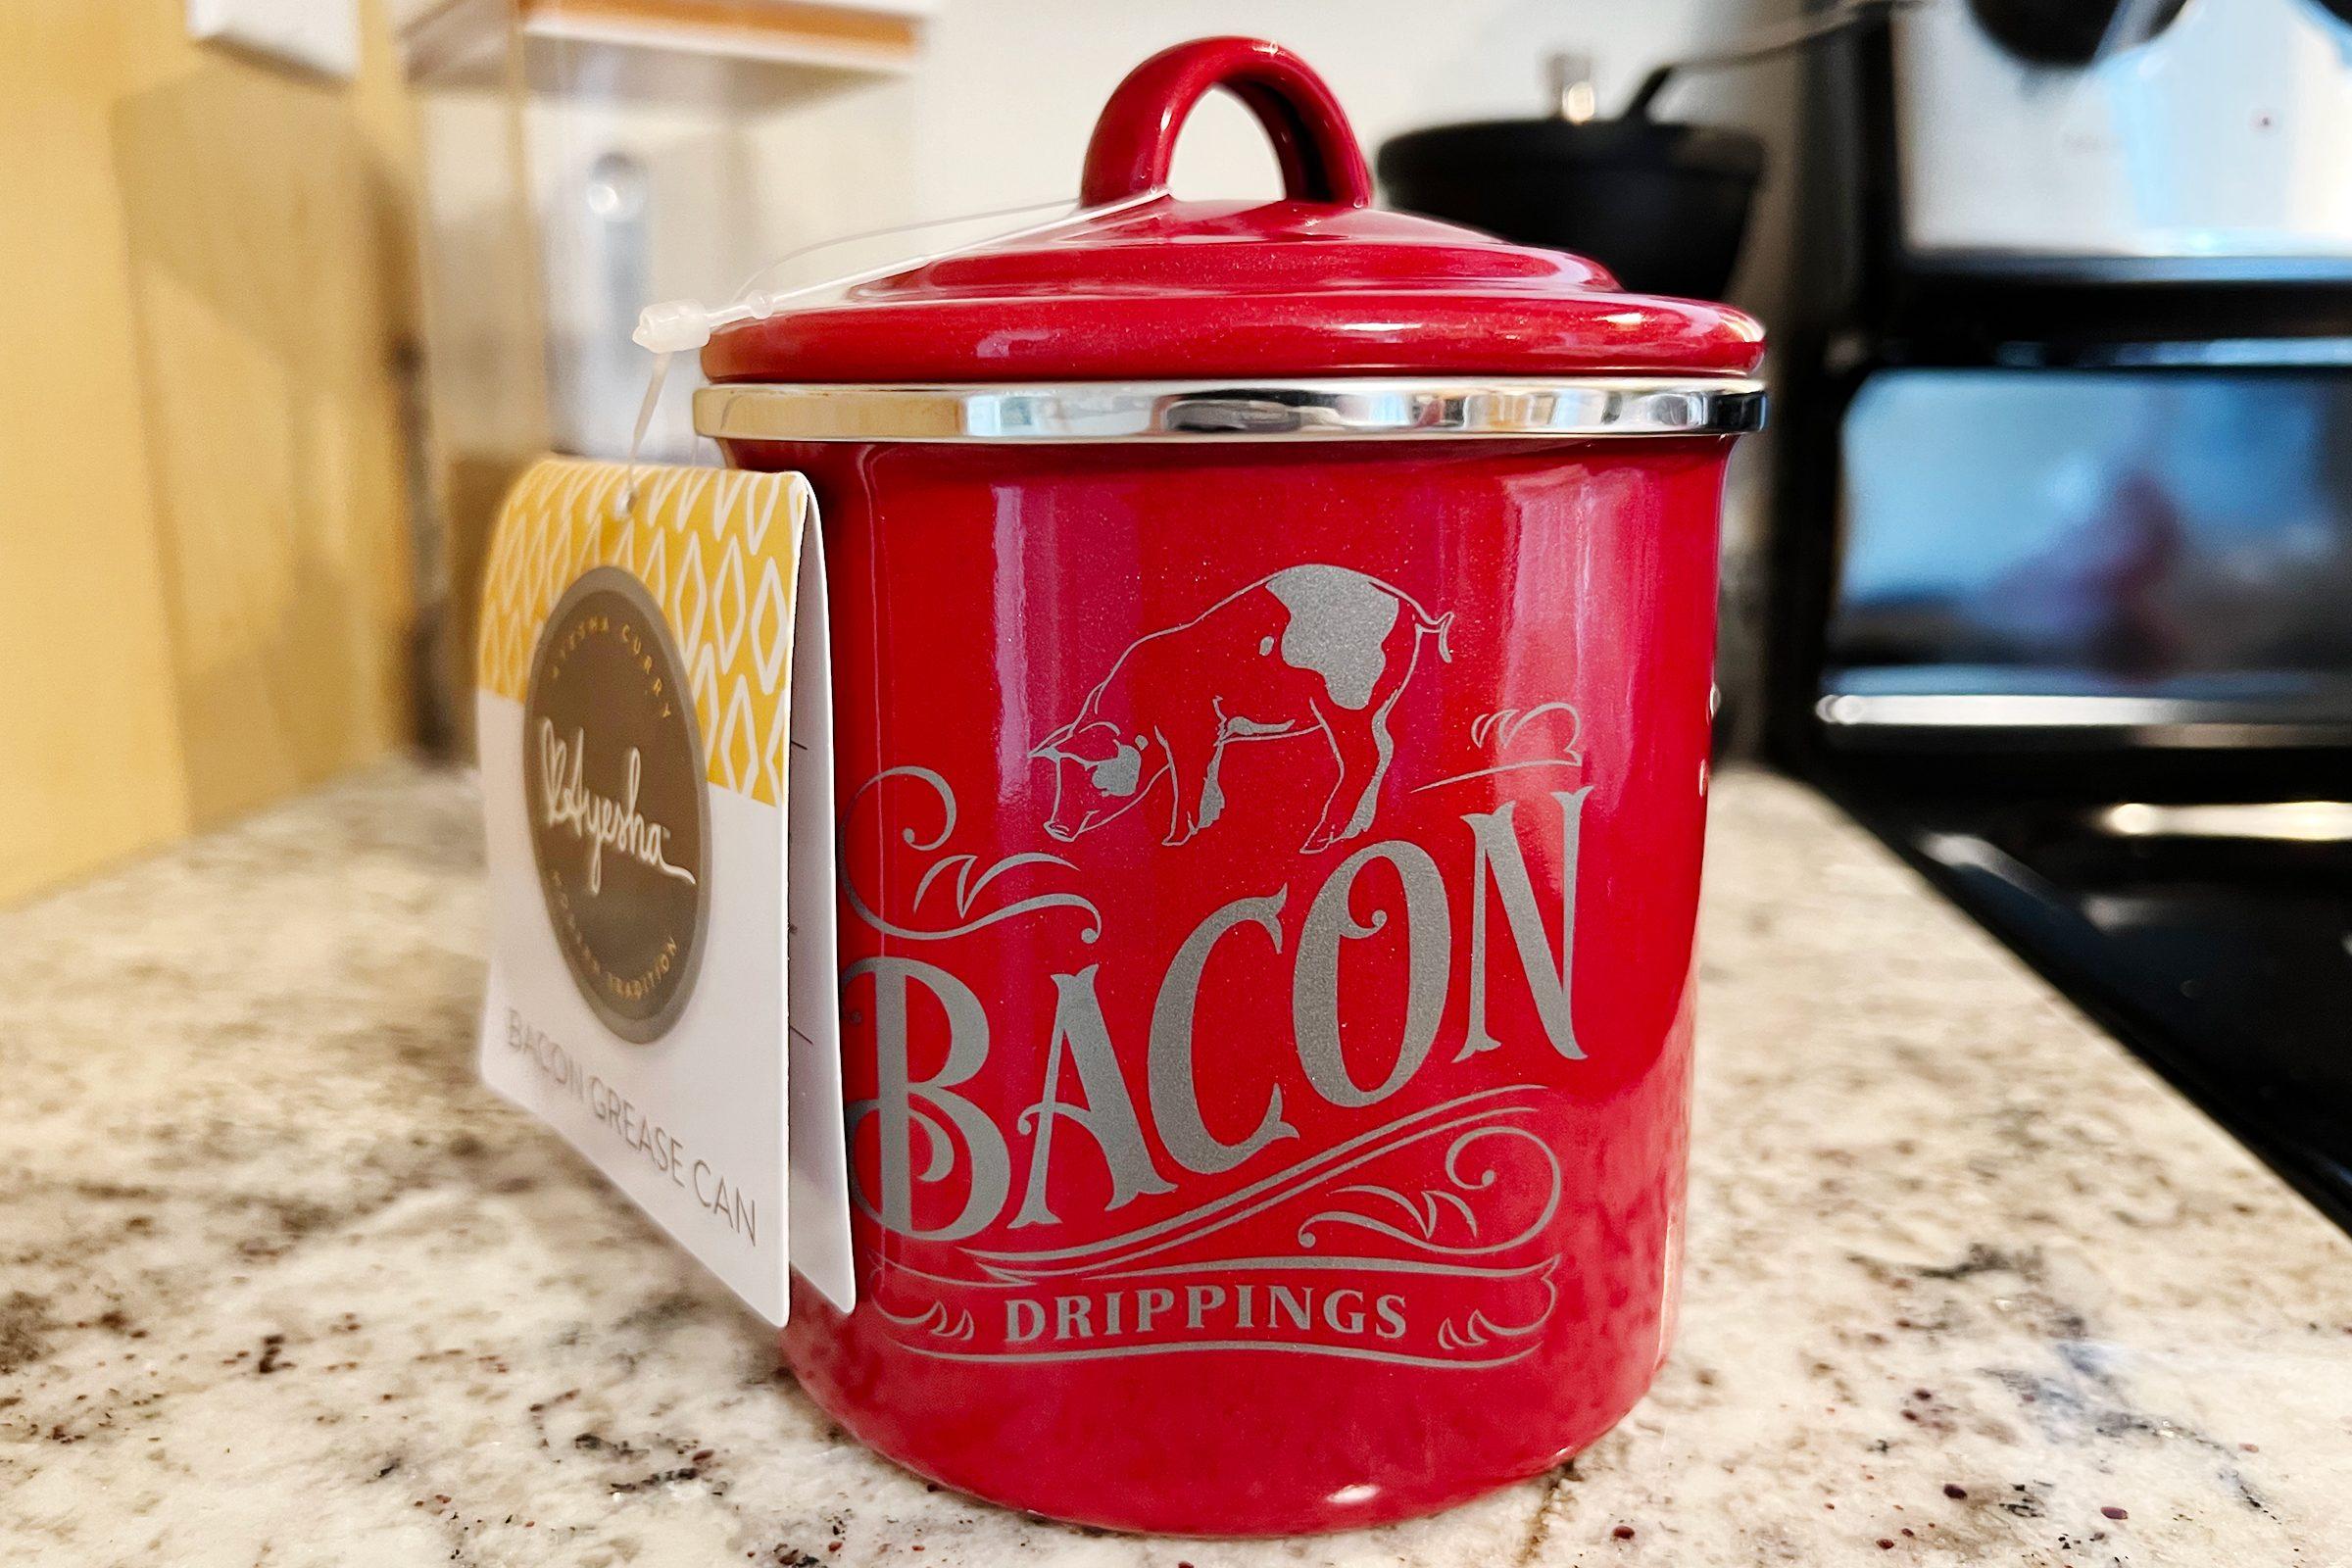 https://www.tasteofhome.com/wp-content/uploads/2021/12/IMG_004076-bacon-grease-container.jpg